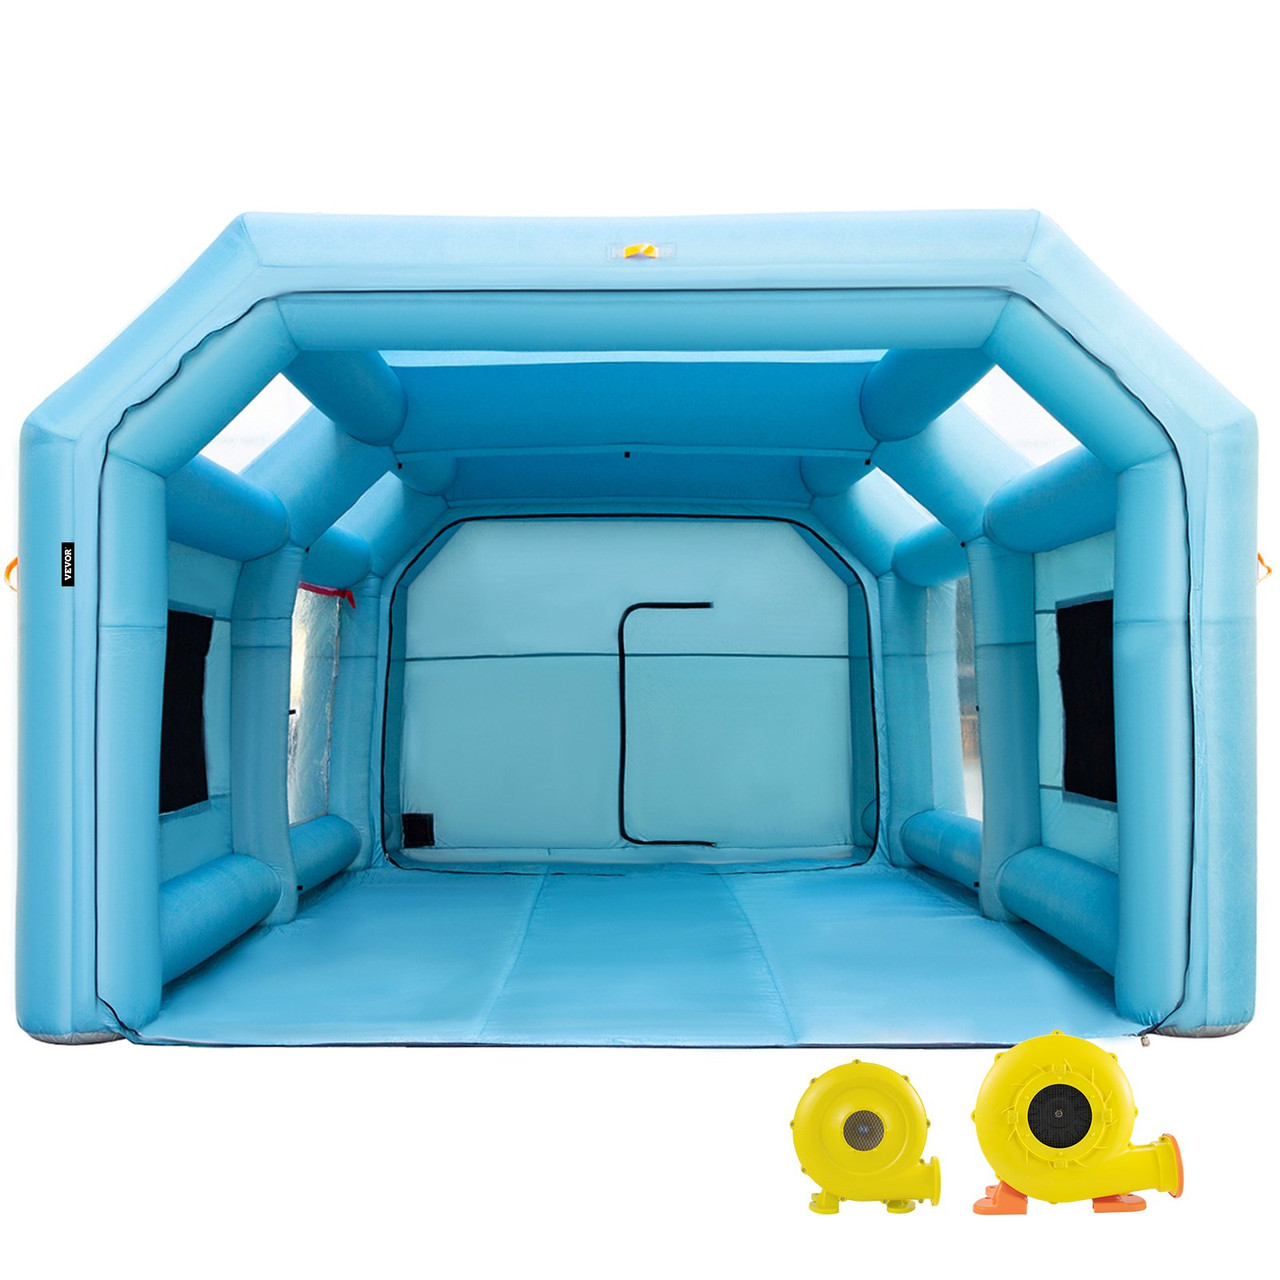 Portable Inflatable Paint Booth, 28x15x10ft Inflatable Spray Booth, Car Paint Tent w/Air Filter System & 2 Blowers, Upgraded Blow Up Spray Booth Tent, Auto Paint Workstation, Car Parking Garage